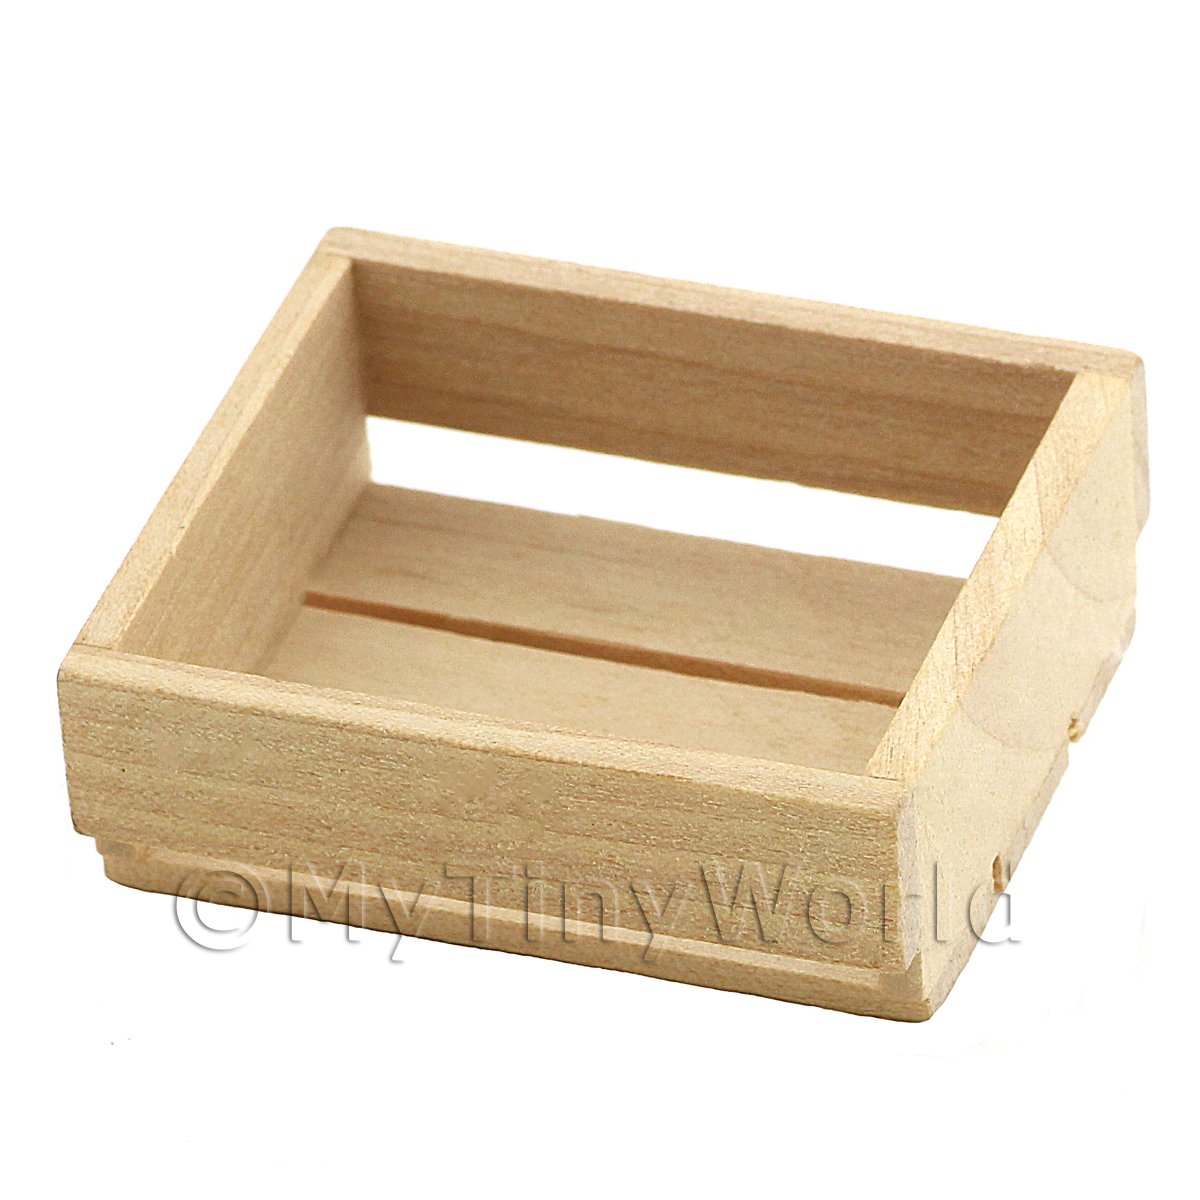 Dollhouse Miniature Small Single Wood Crate for Store & Market 